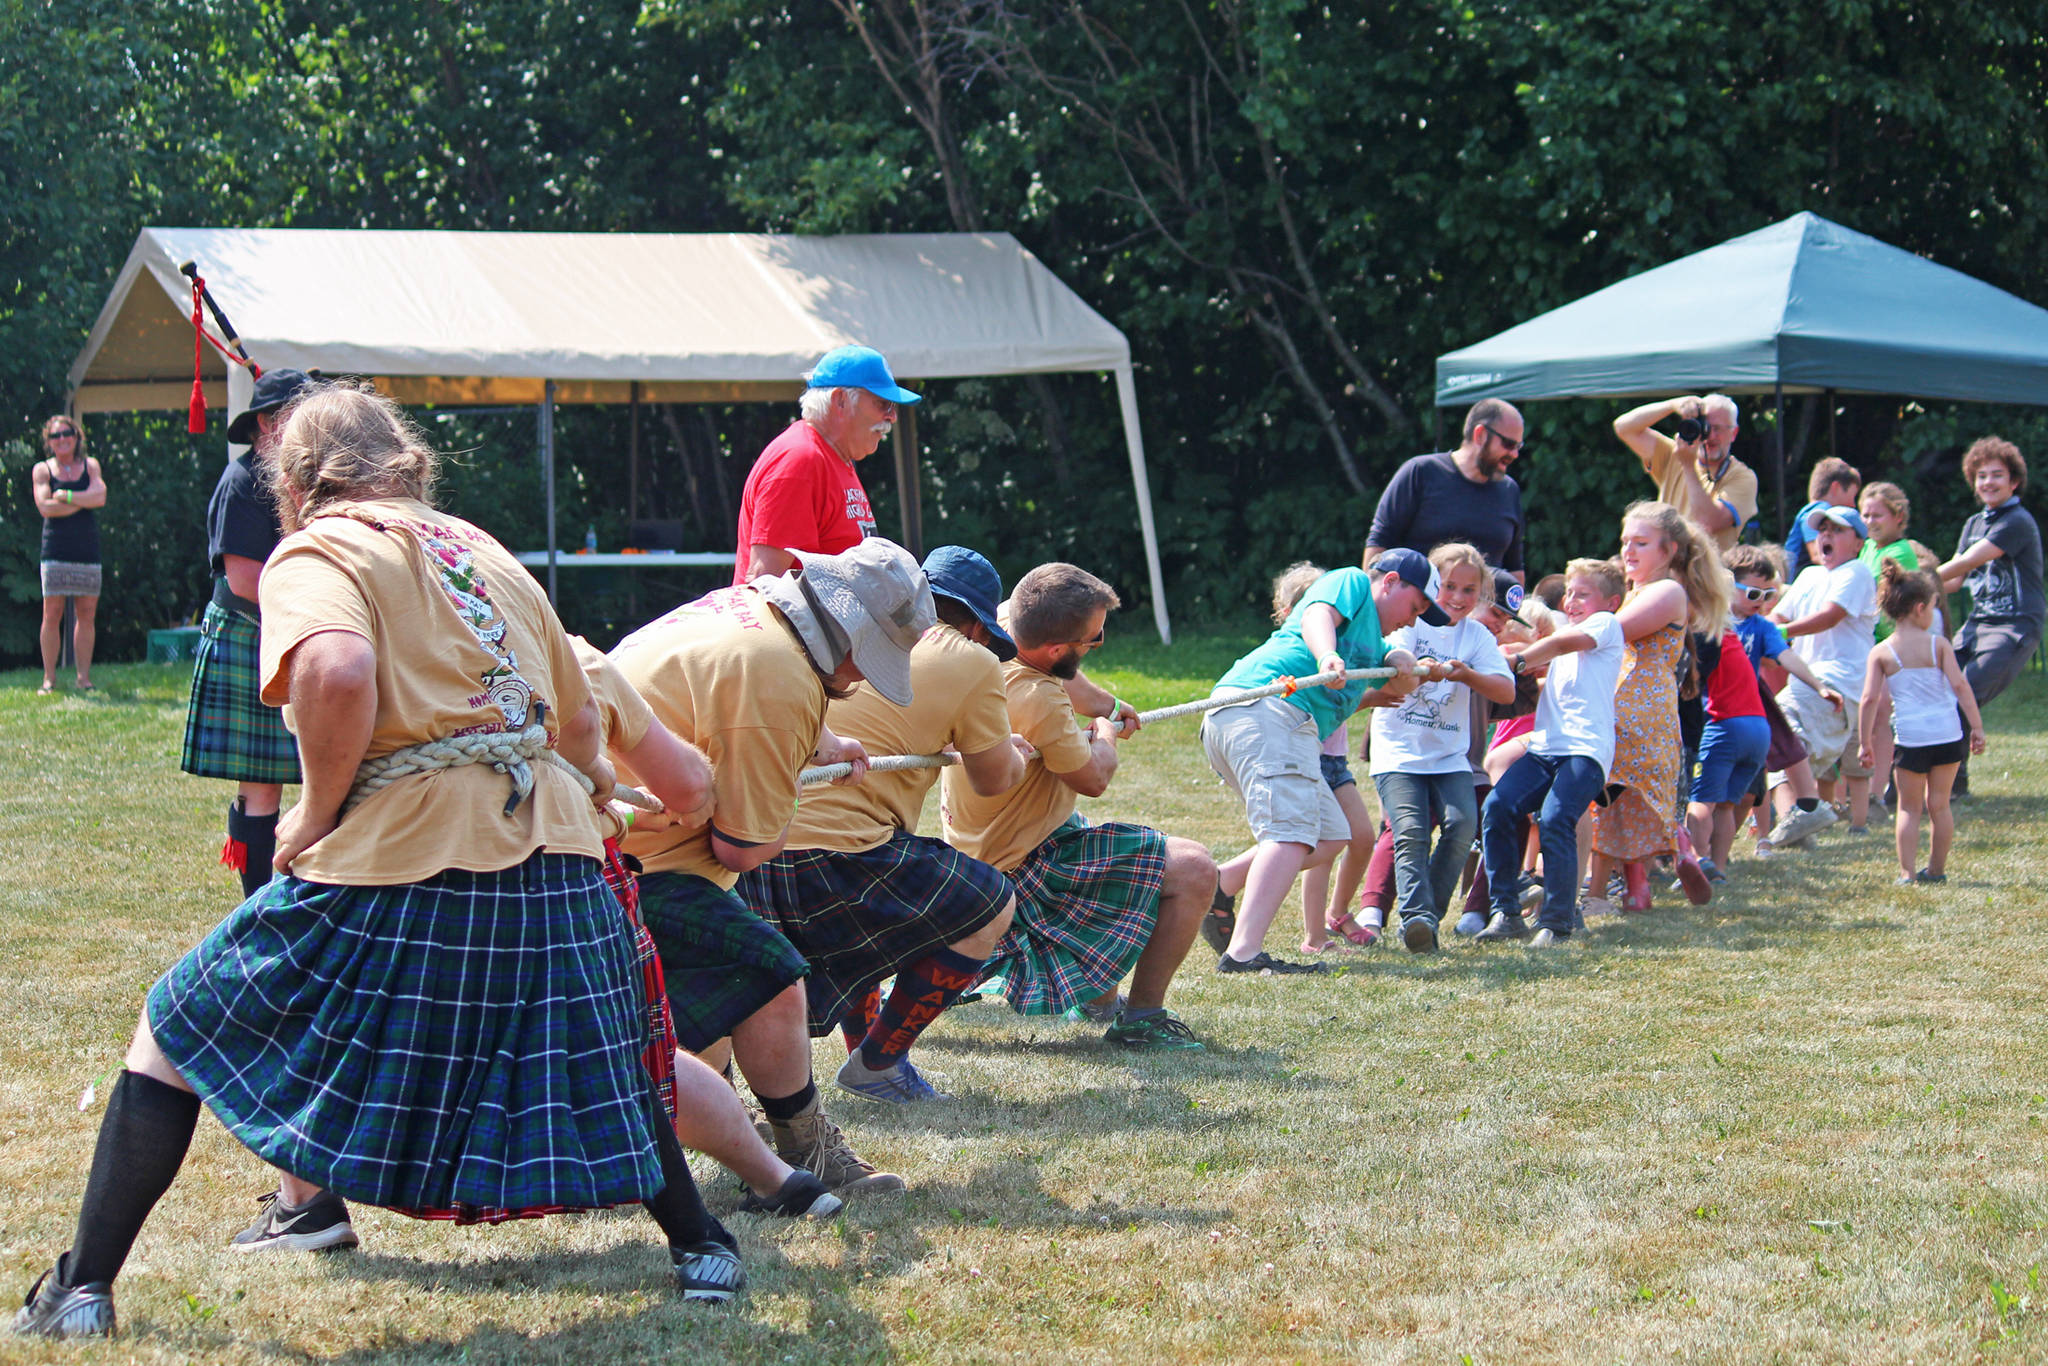 Competitors in this year’s Kachemak Bay Highland Games struggle to hold their ground against a large group of children.